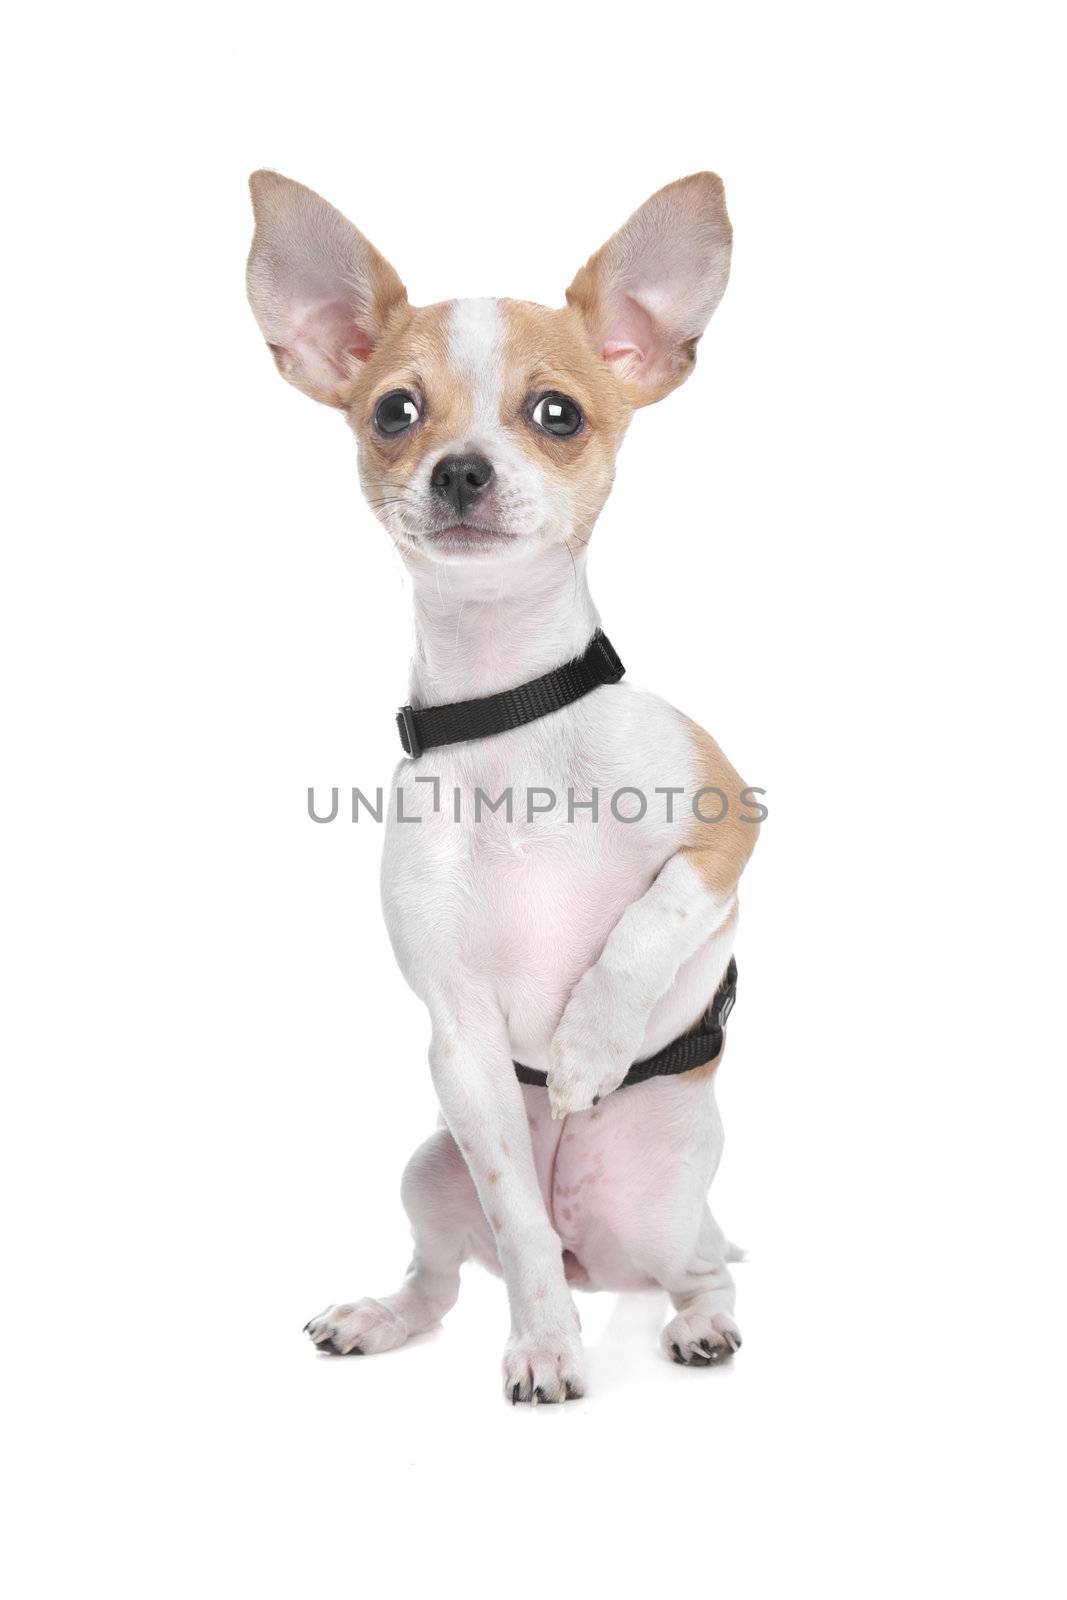 Short haired chihuahua by eriklam